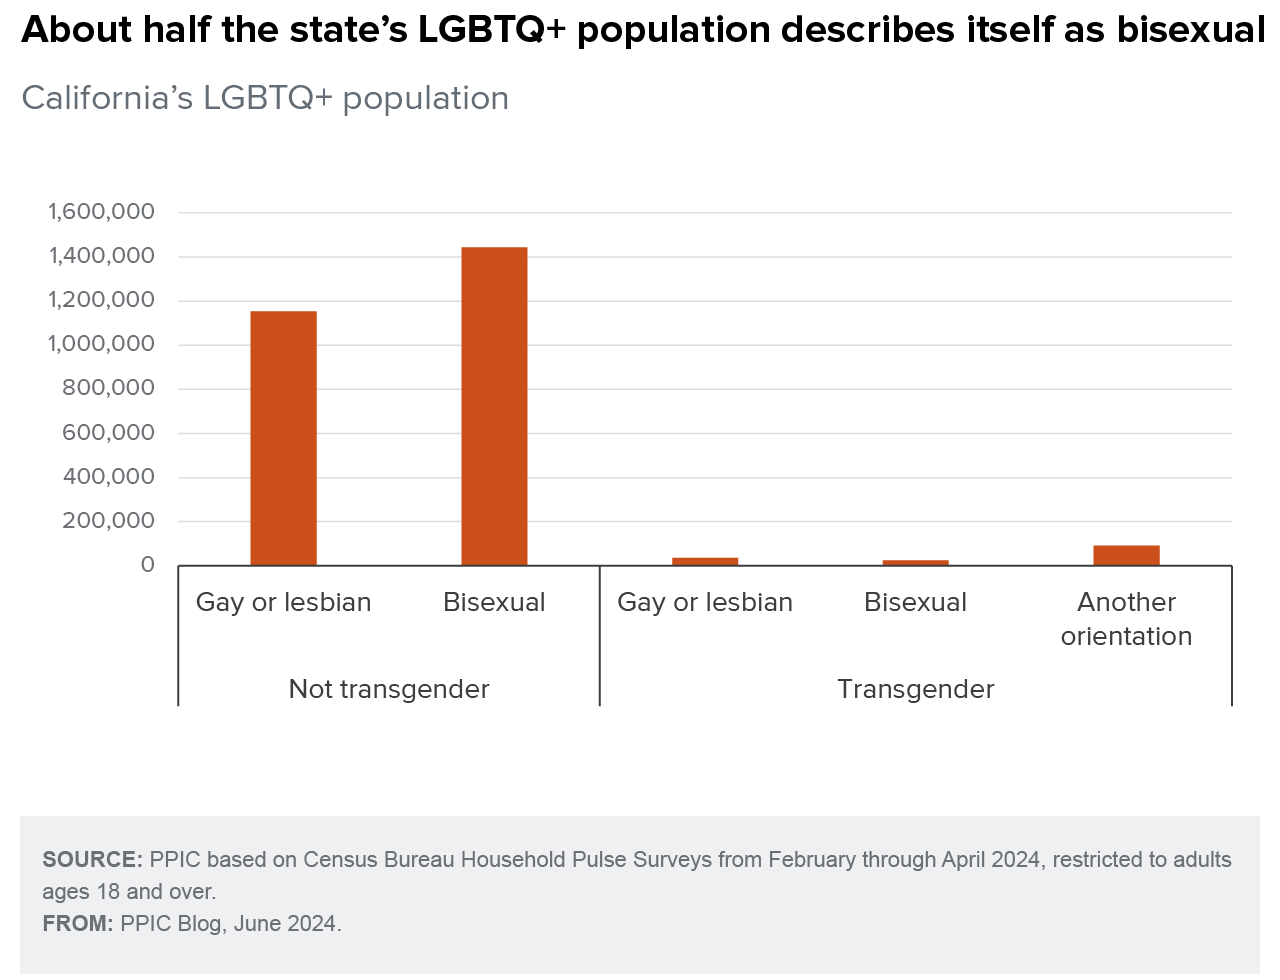 figure - About half the state's LGBTQ+ population describes itself as bisexual